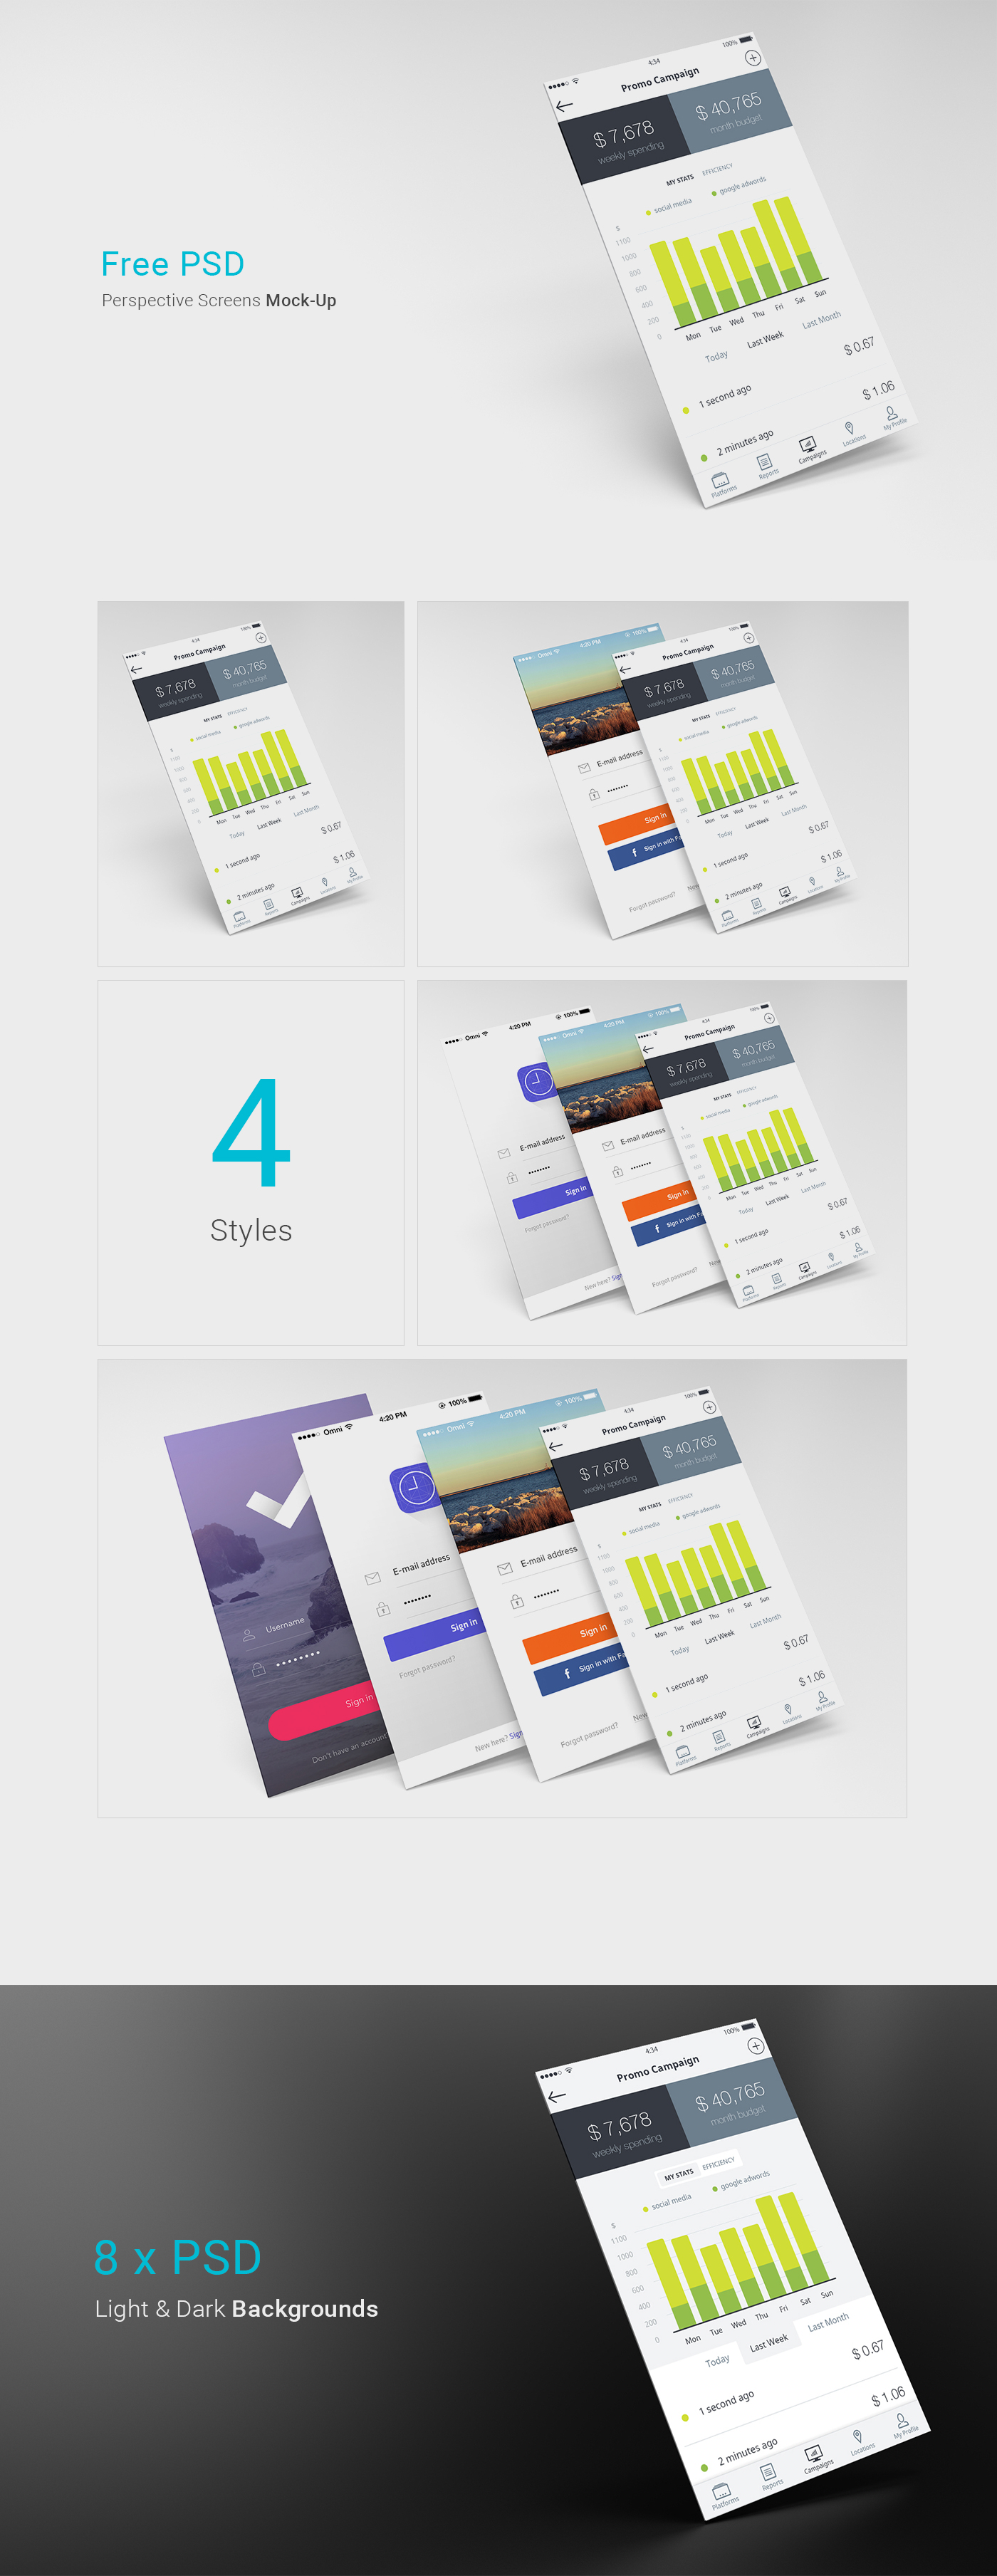 freebie Mockup app Website Perspective screen canvas free ios android mobile psd showcase